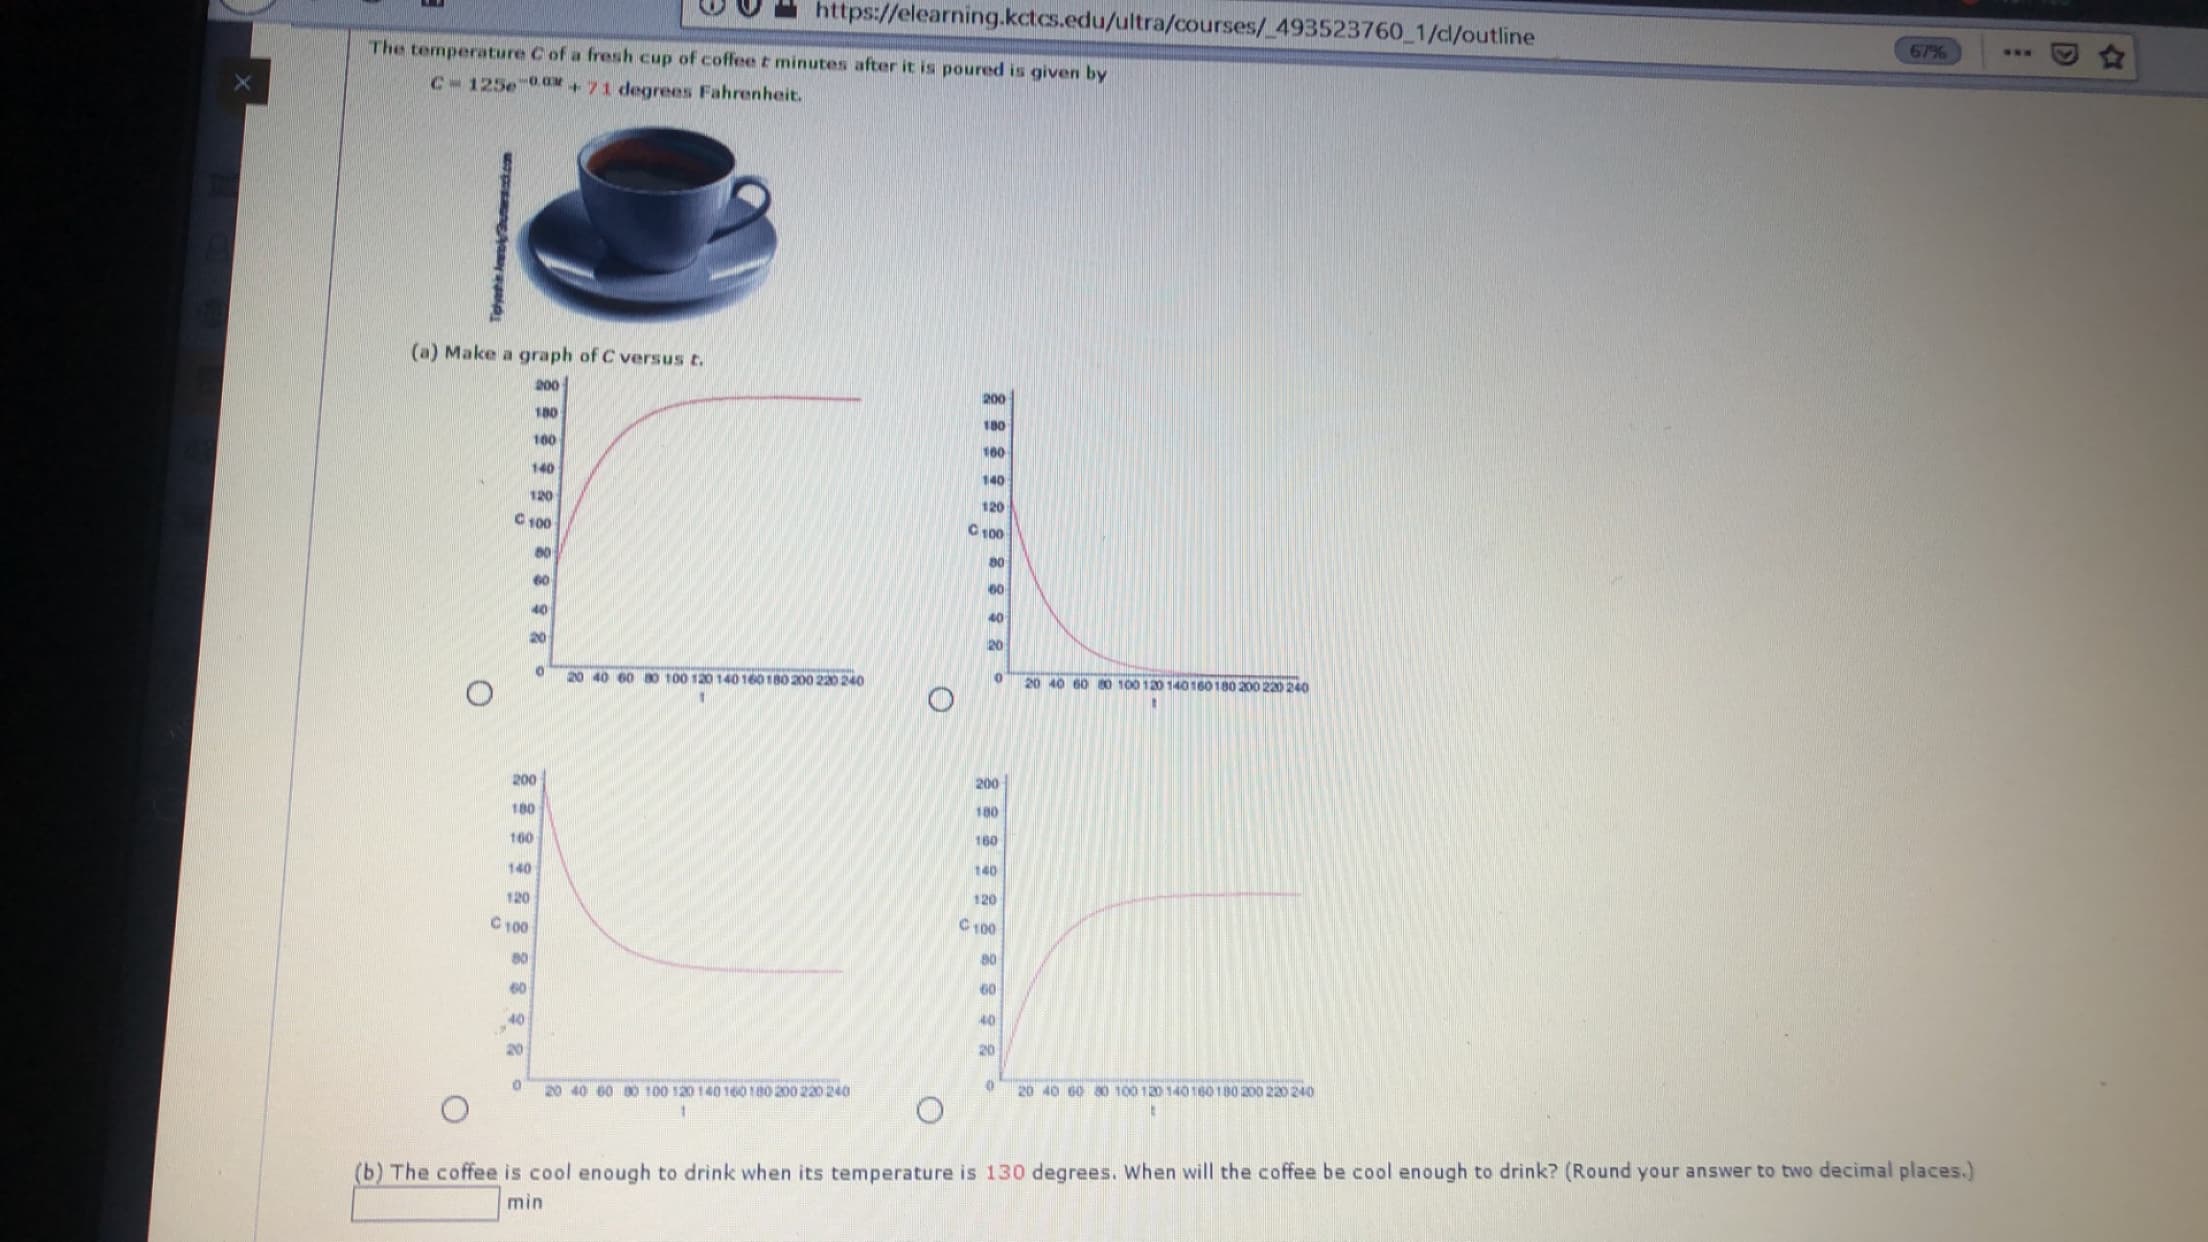 https://elearning.kctcs.edu/ultra/courses/ 493523760 1/cl/outline
The temperature C of a fresh cup of coffee t minutes after it is poured is given by
67%
C 125e 0
71 degrees Fahrenheit.
(a) Make a graph of C versus t
200
200
180
180
100
160
140
140
120
120
C 100
C 100
80
60
60
40
20
20
20 40 60 0 100 120 140160180 200 220 240
0
20
40 60
80 100 120 140160180 200 220 240
t
200
200
180
180
160
160
140
140
120
120
C100
C 100
80
80
60
40
40
20
20
20 40 60 0 100 120 140160180 200 220 240
20 40 60 a0 100 120 140160180 200 220 240
(b) The coffee is cool enough to drink when its temperature is 130 degrees. When will the coffee be cool enough to drink? (Round your answer to two decimal places.)
min
Tighei Aneh com
